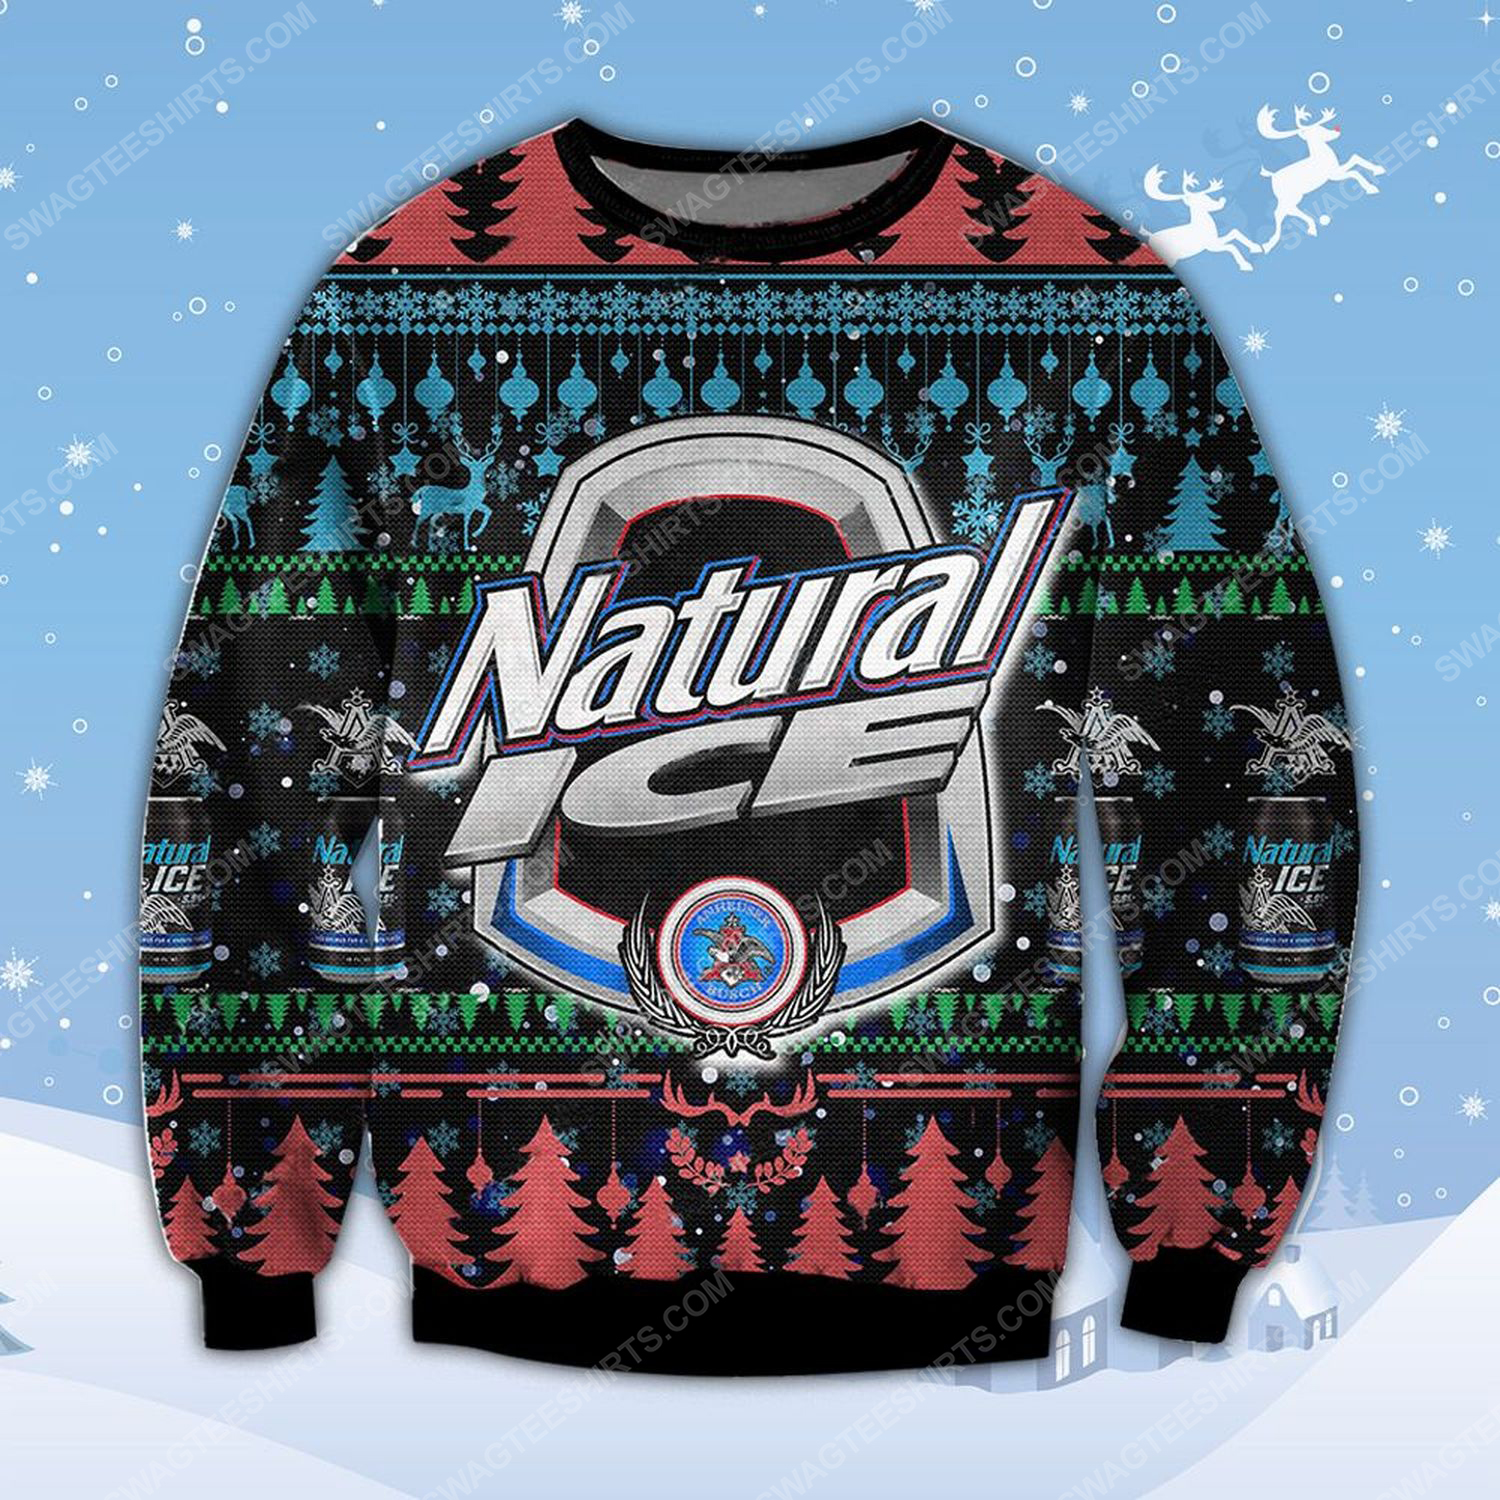 Natural ice beer ugly christmas sweater